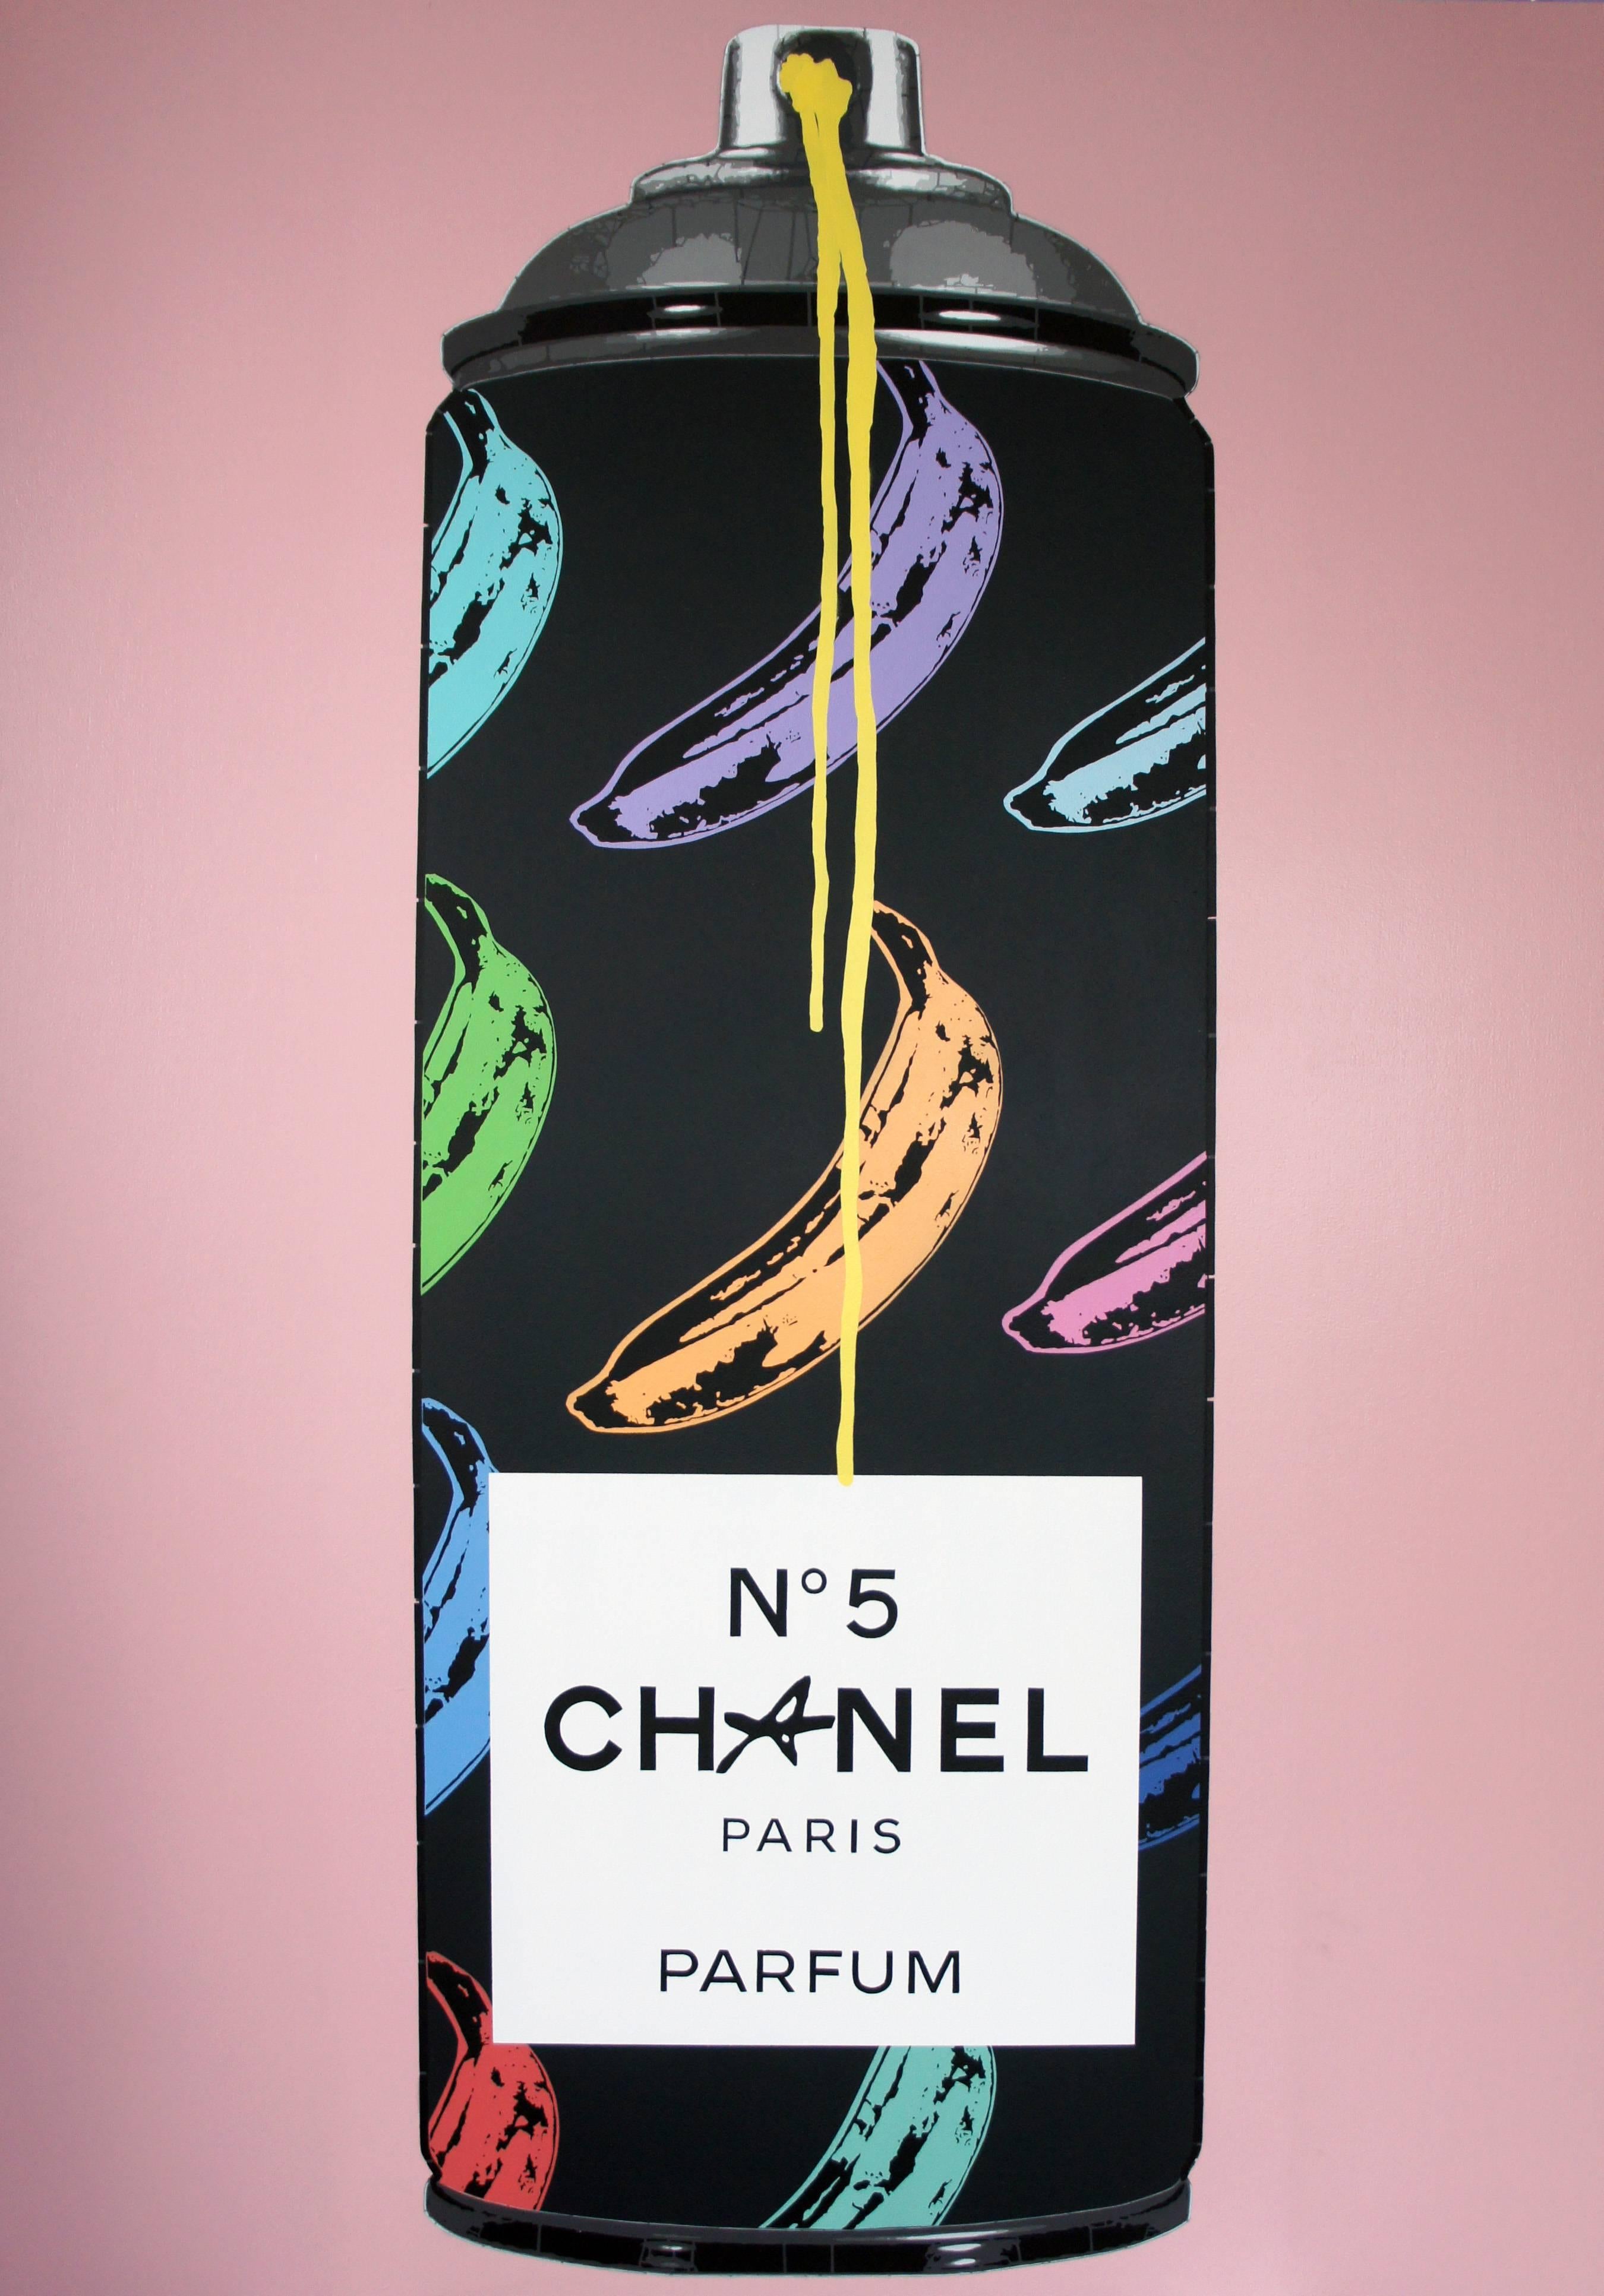 Chanel Underground - Painting by Campbell la Pun